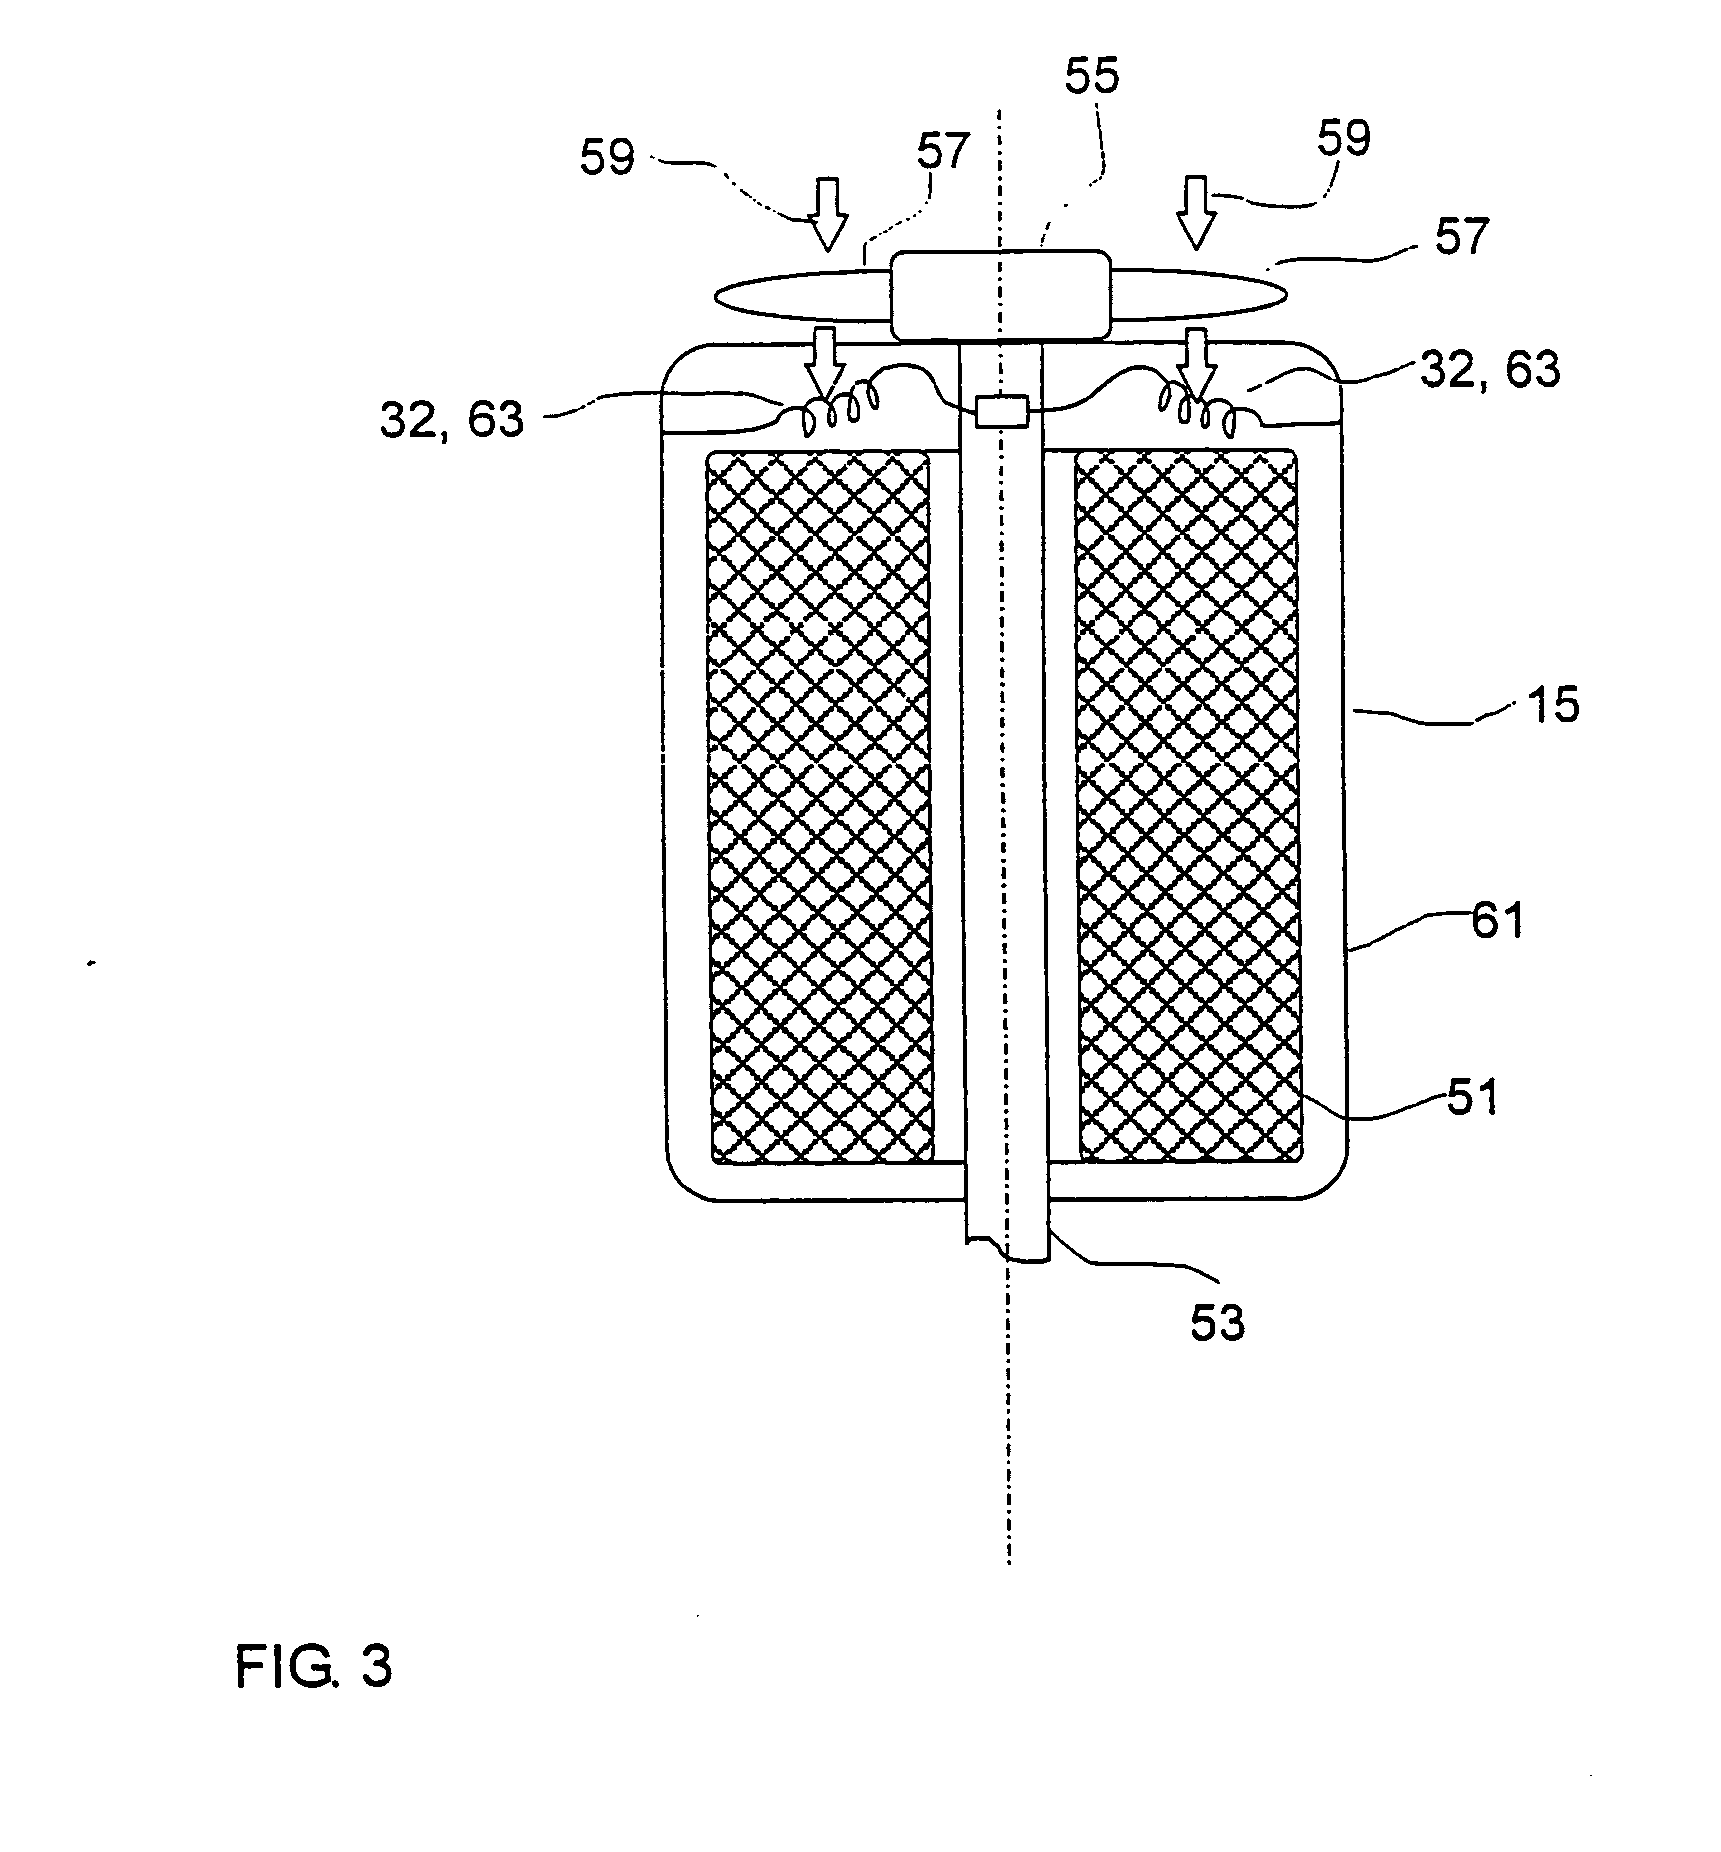 Apparatus for power control by phase gating and a method for harmonic reduction